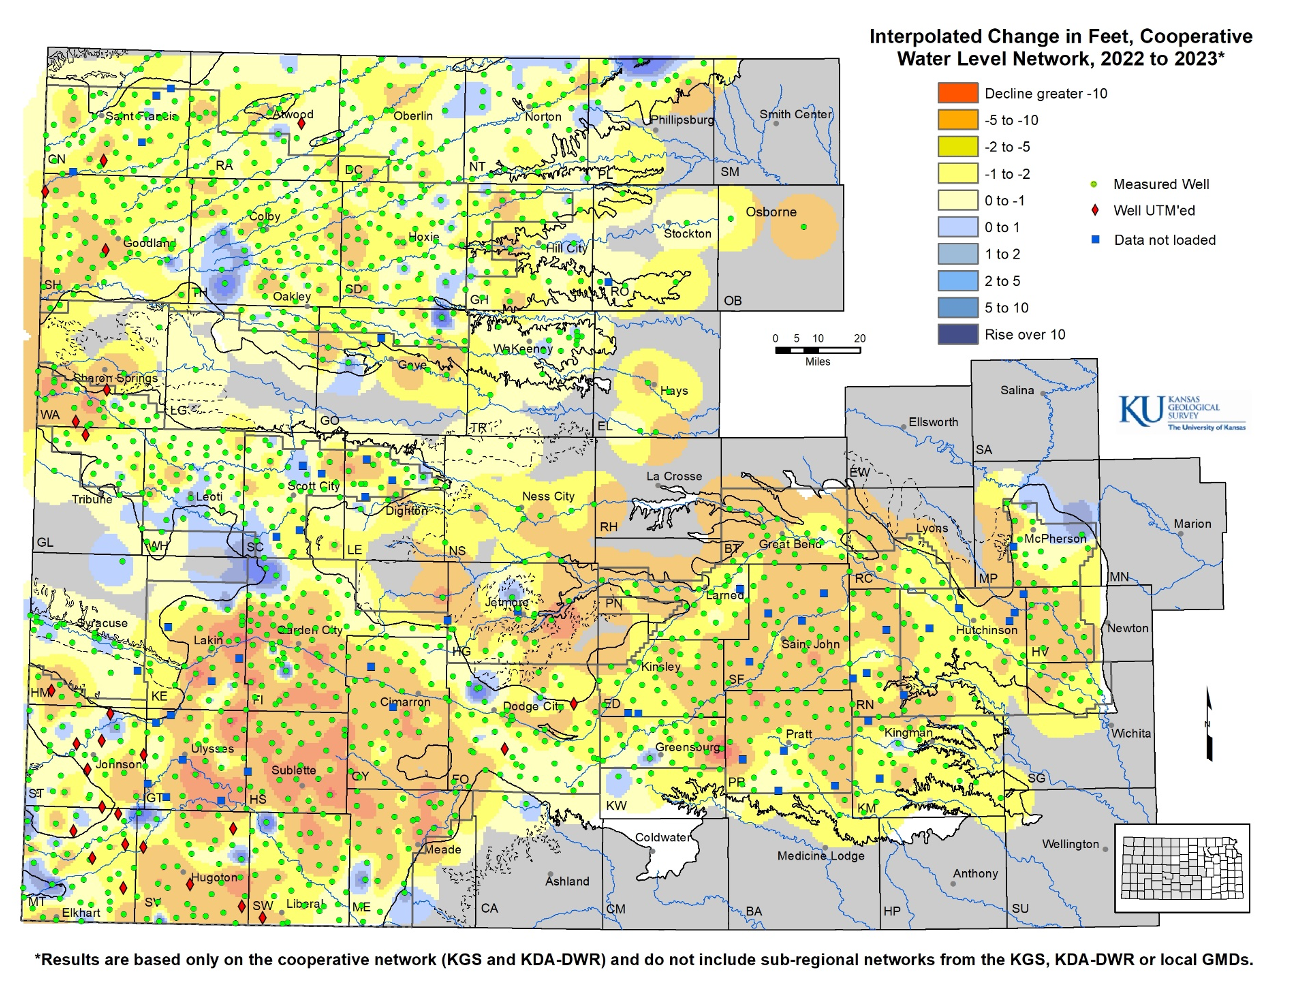 "Preliminary results from the annual Kansas Geological Survey assessment of groundwater levels in western and south-central Kansas, taken in early 2023."